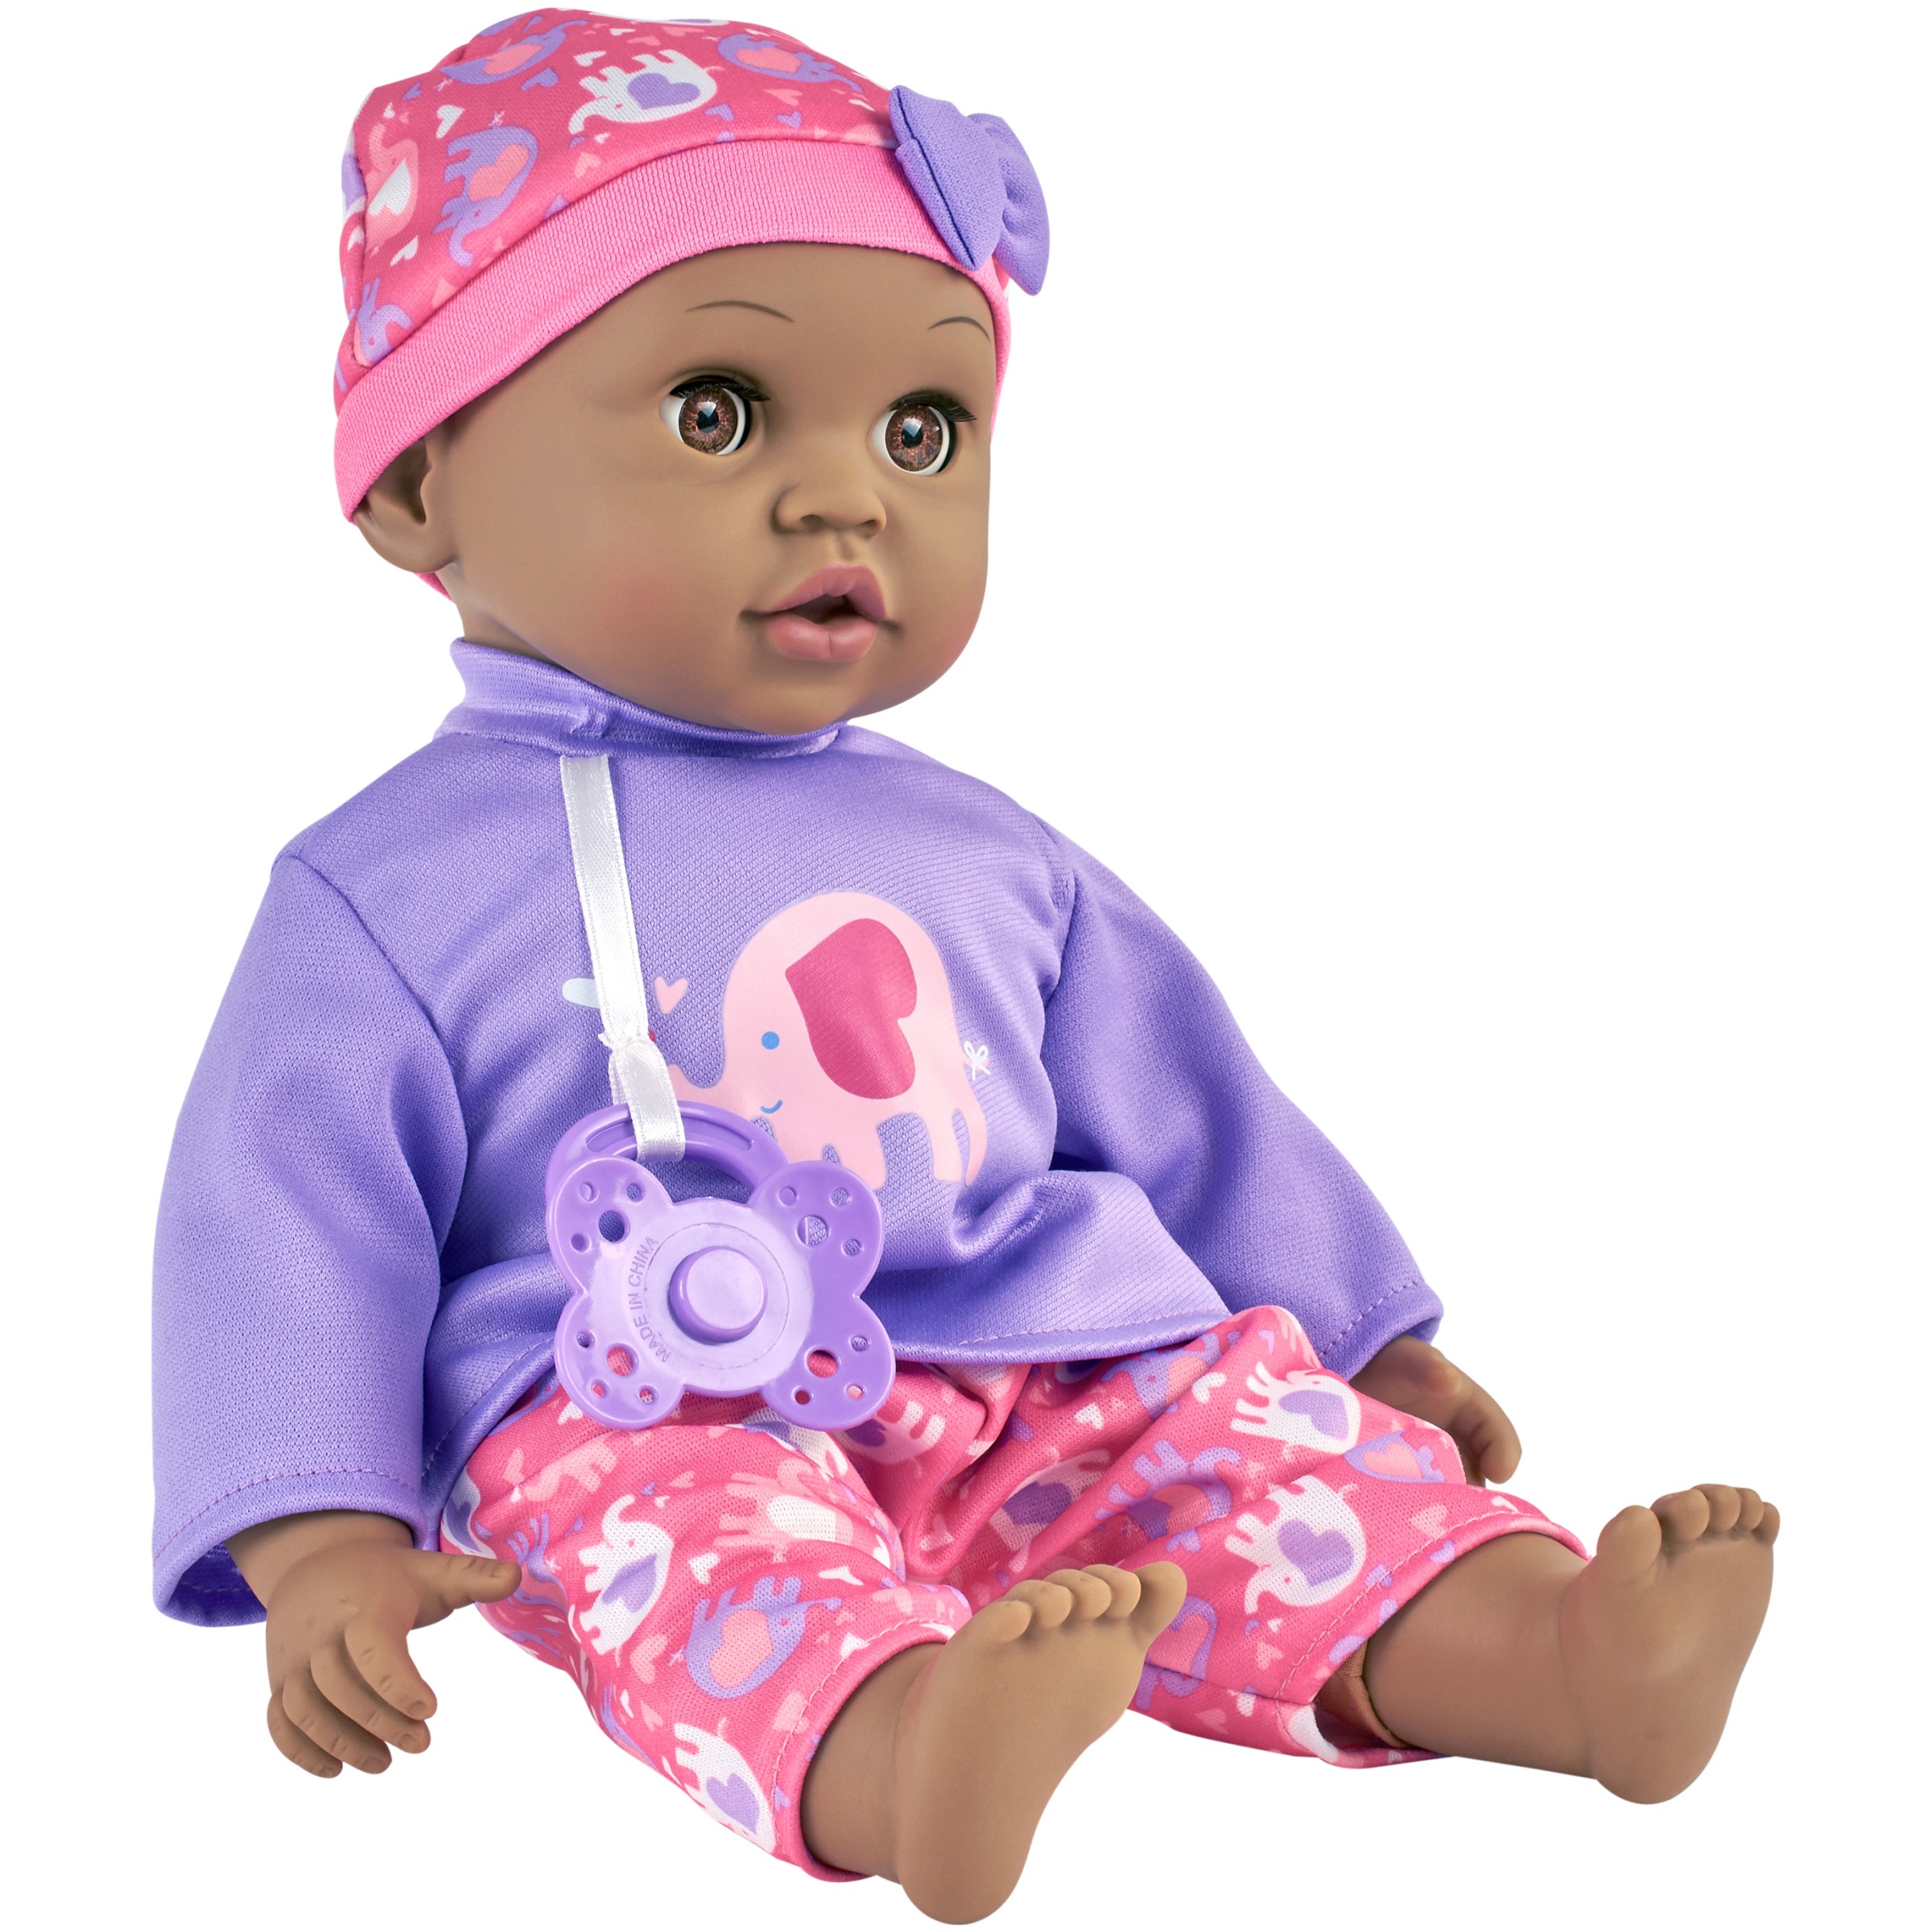 My Sweet Love® Baby Doll & Accessories 4 pc Box, Brown Eyes - image 2 of 4